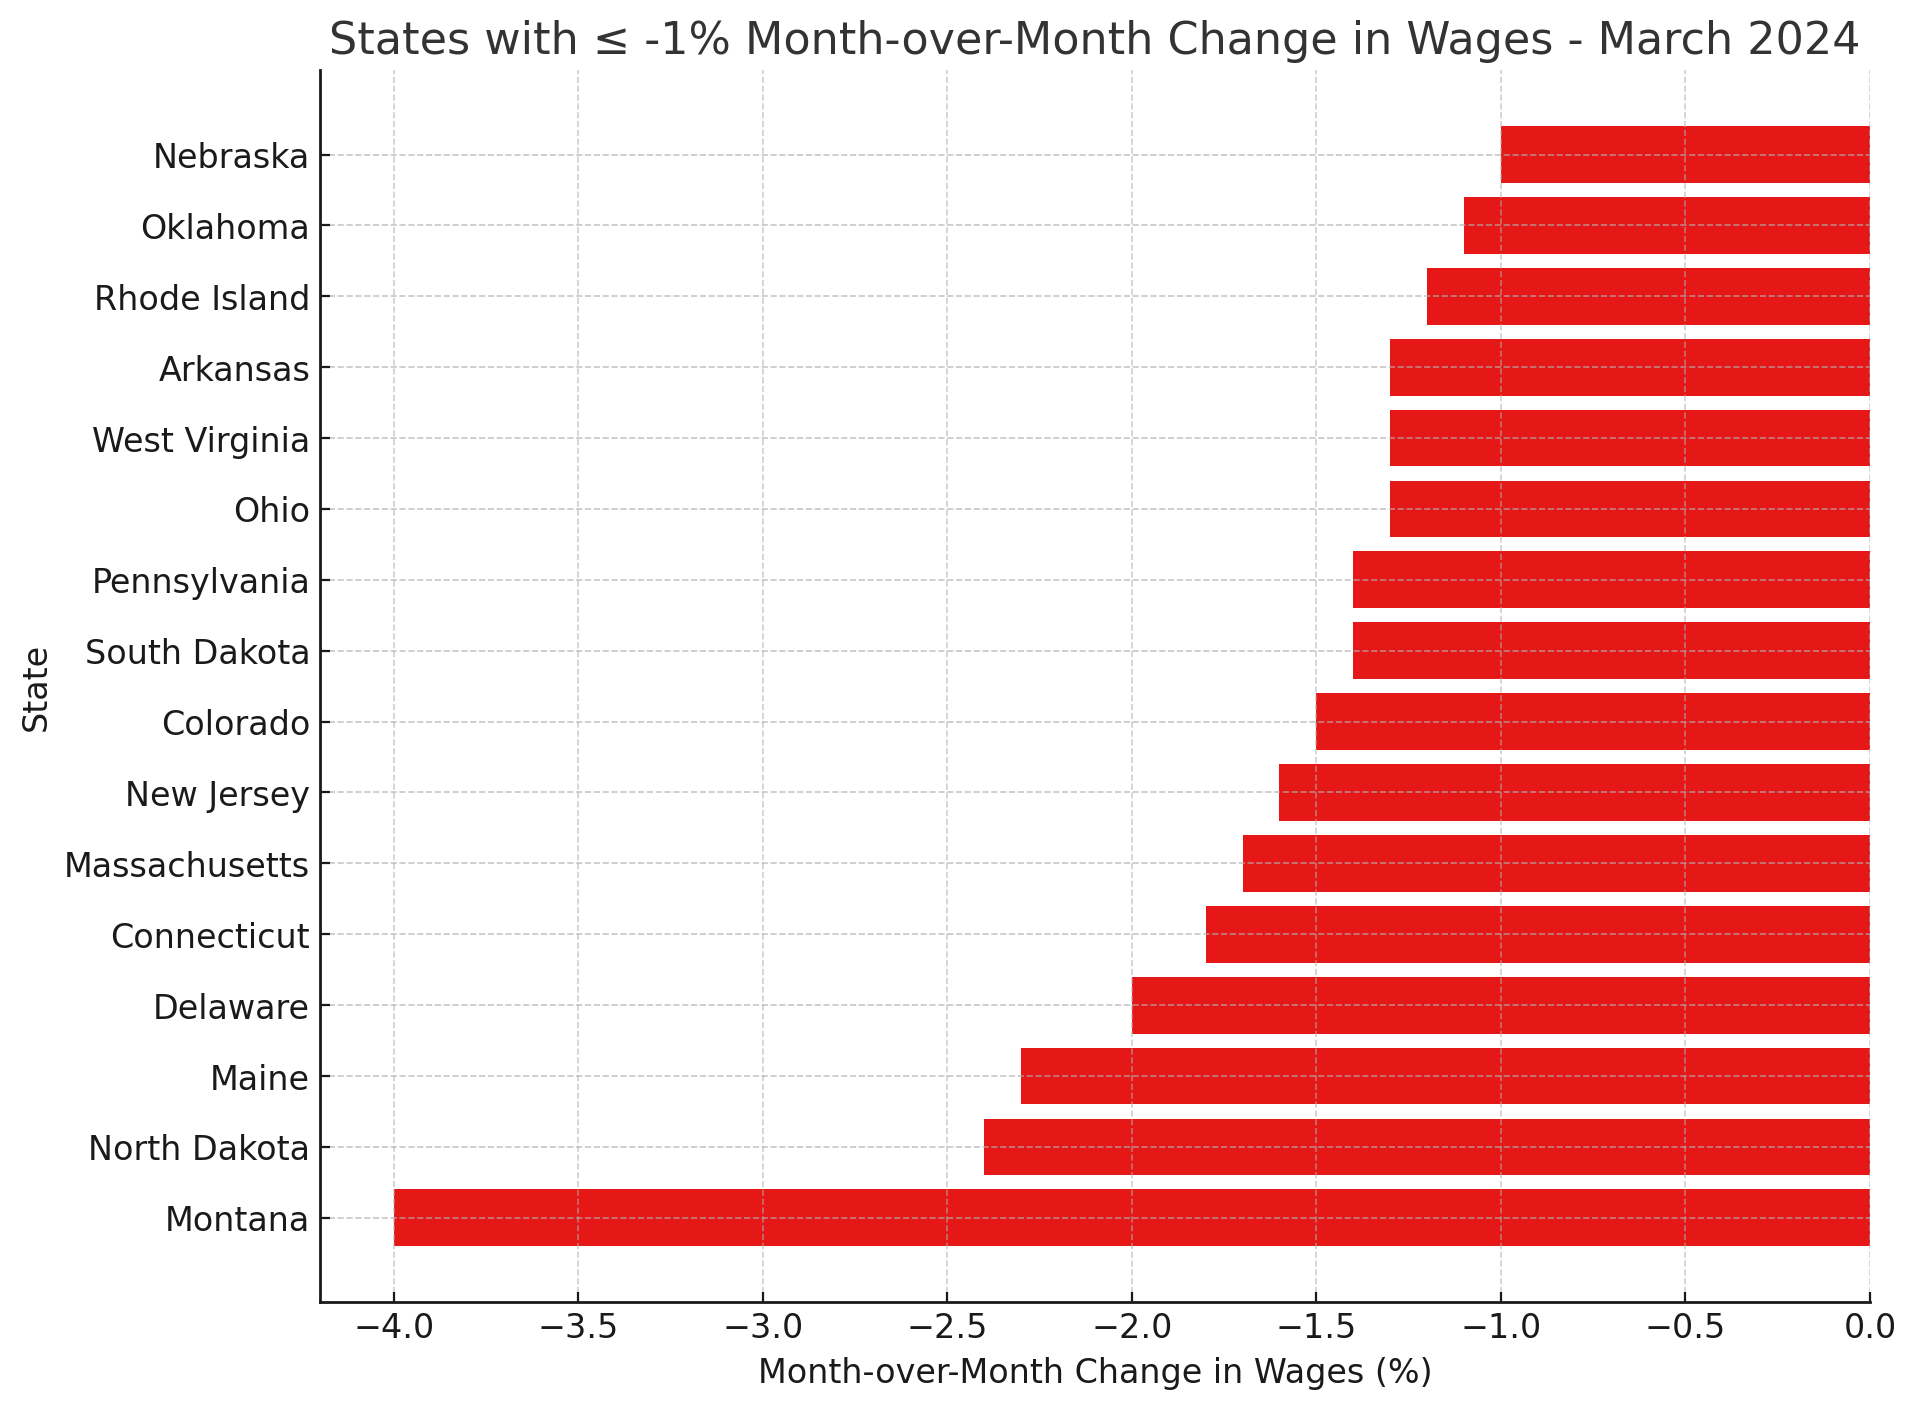 States with Wage Decreases